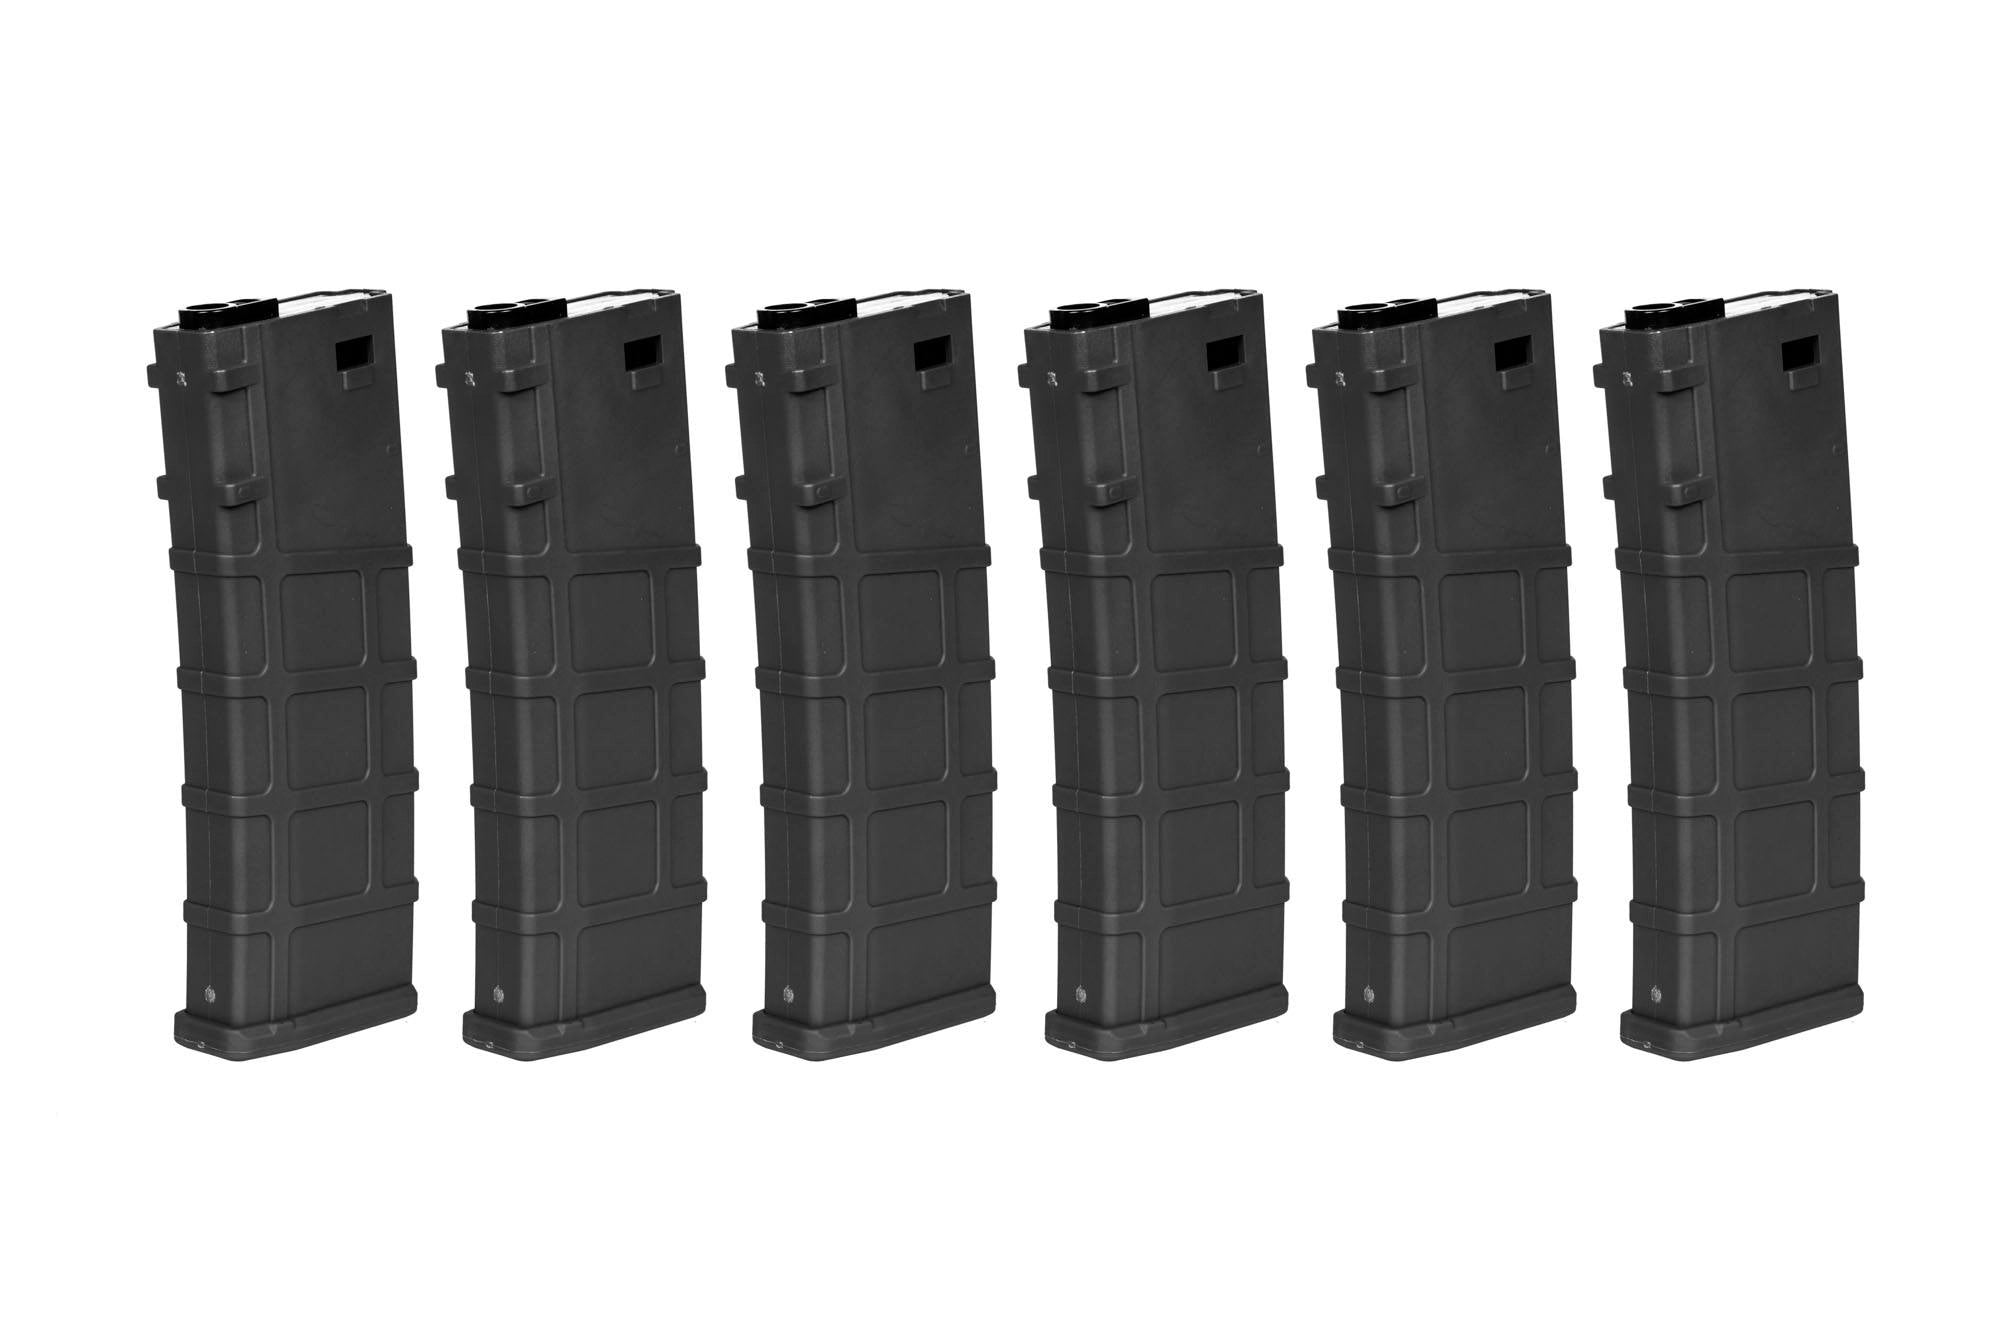 Set of 6 Polymer 30 BB's Real-Cap magazines for M4/M16 replicas - Black